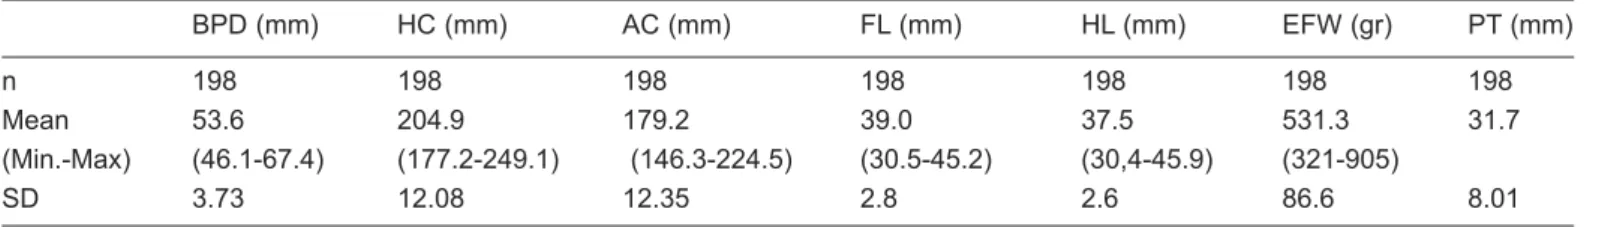 Table I:  Evaluation of fetal biometric measurements and placental thickness